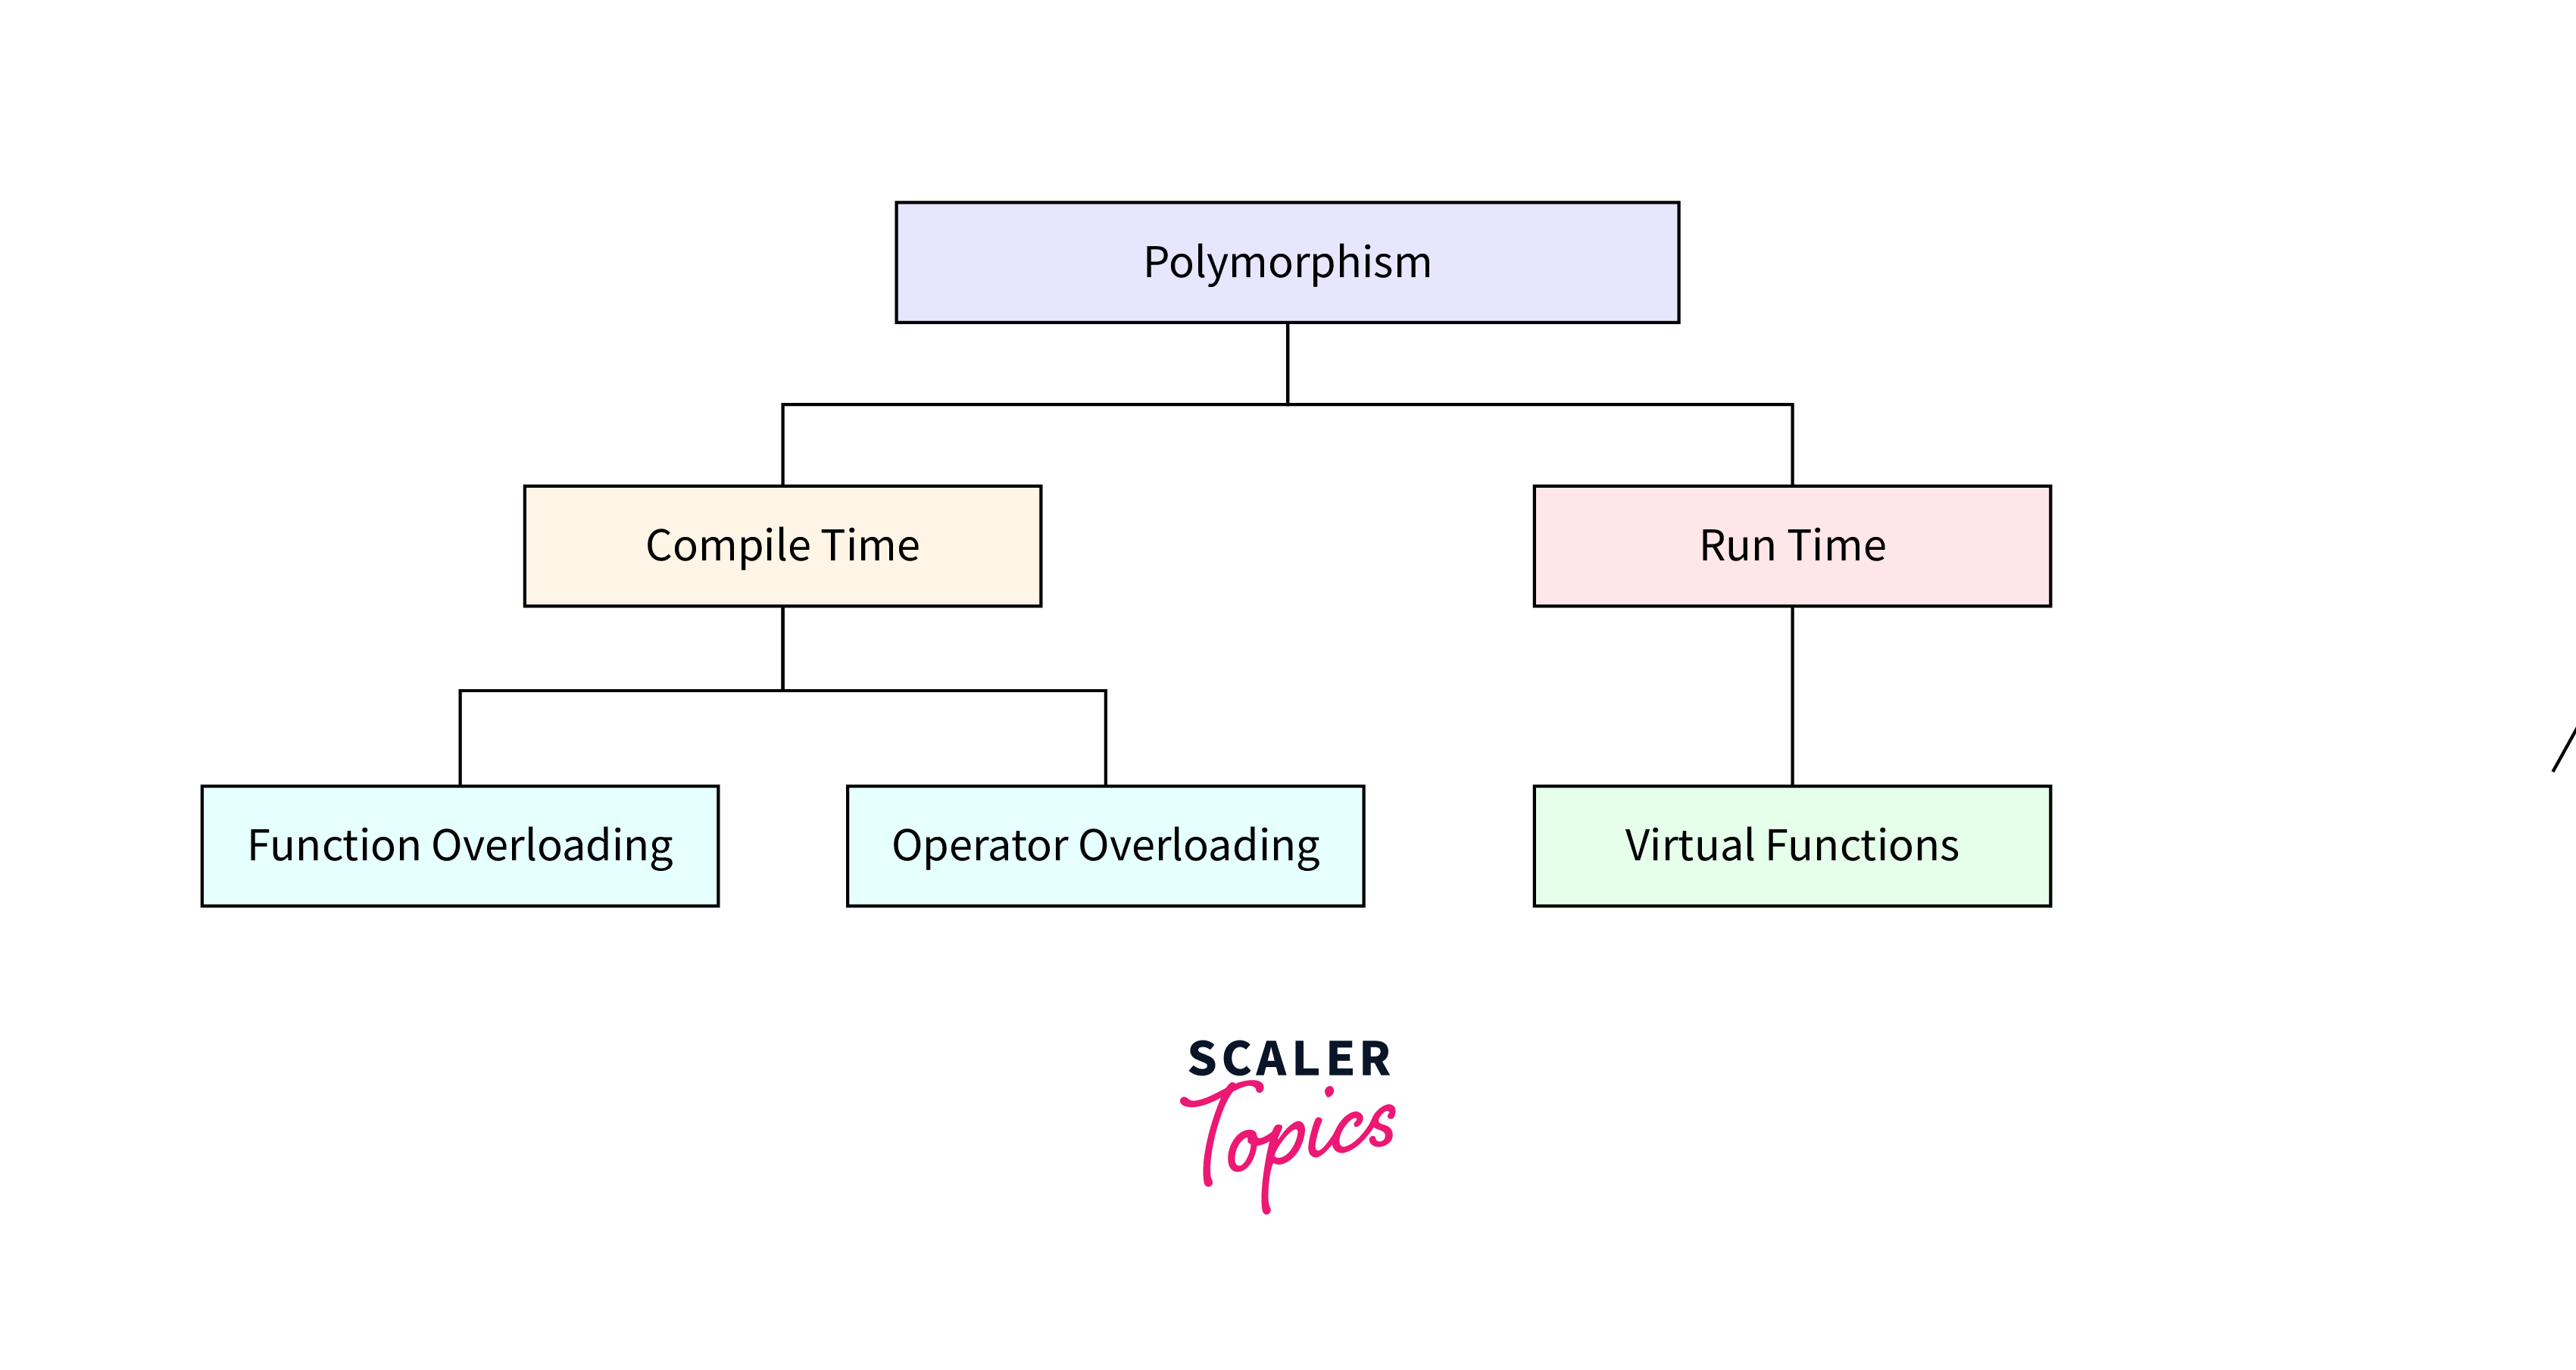 Types of Polymorphism in Java